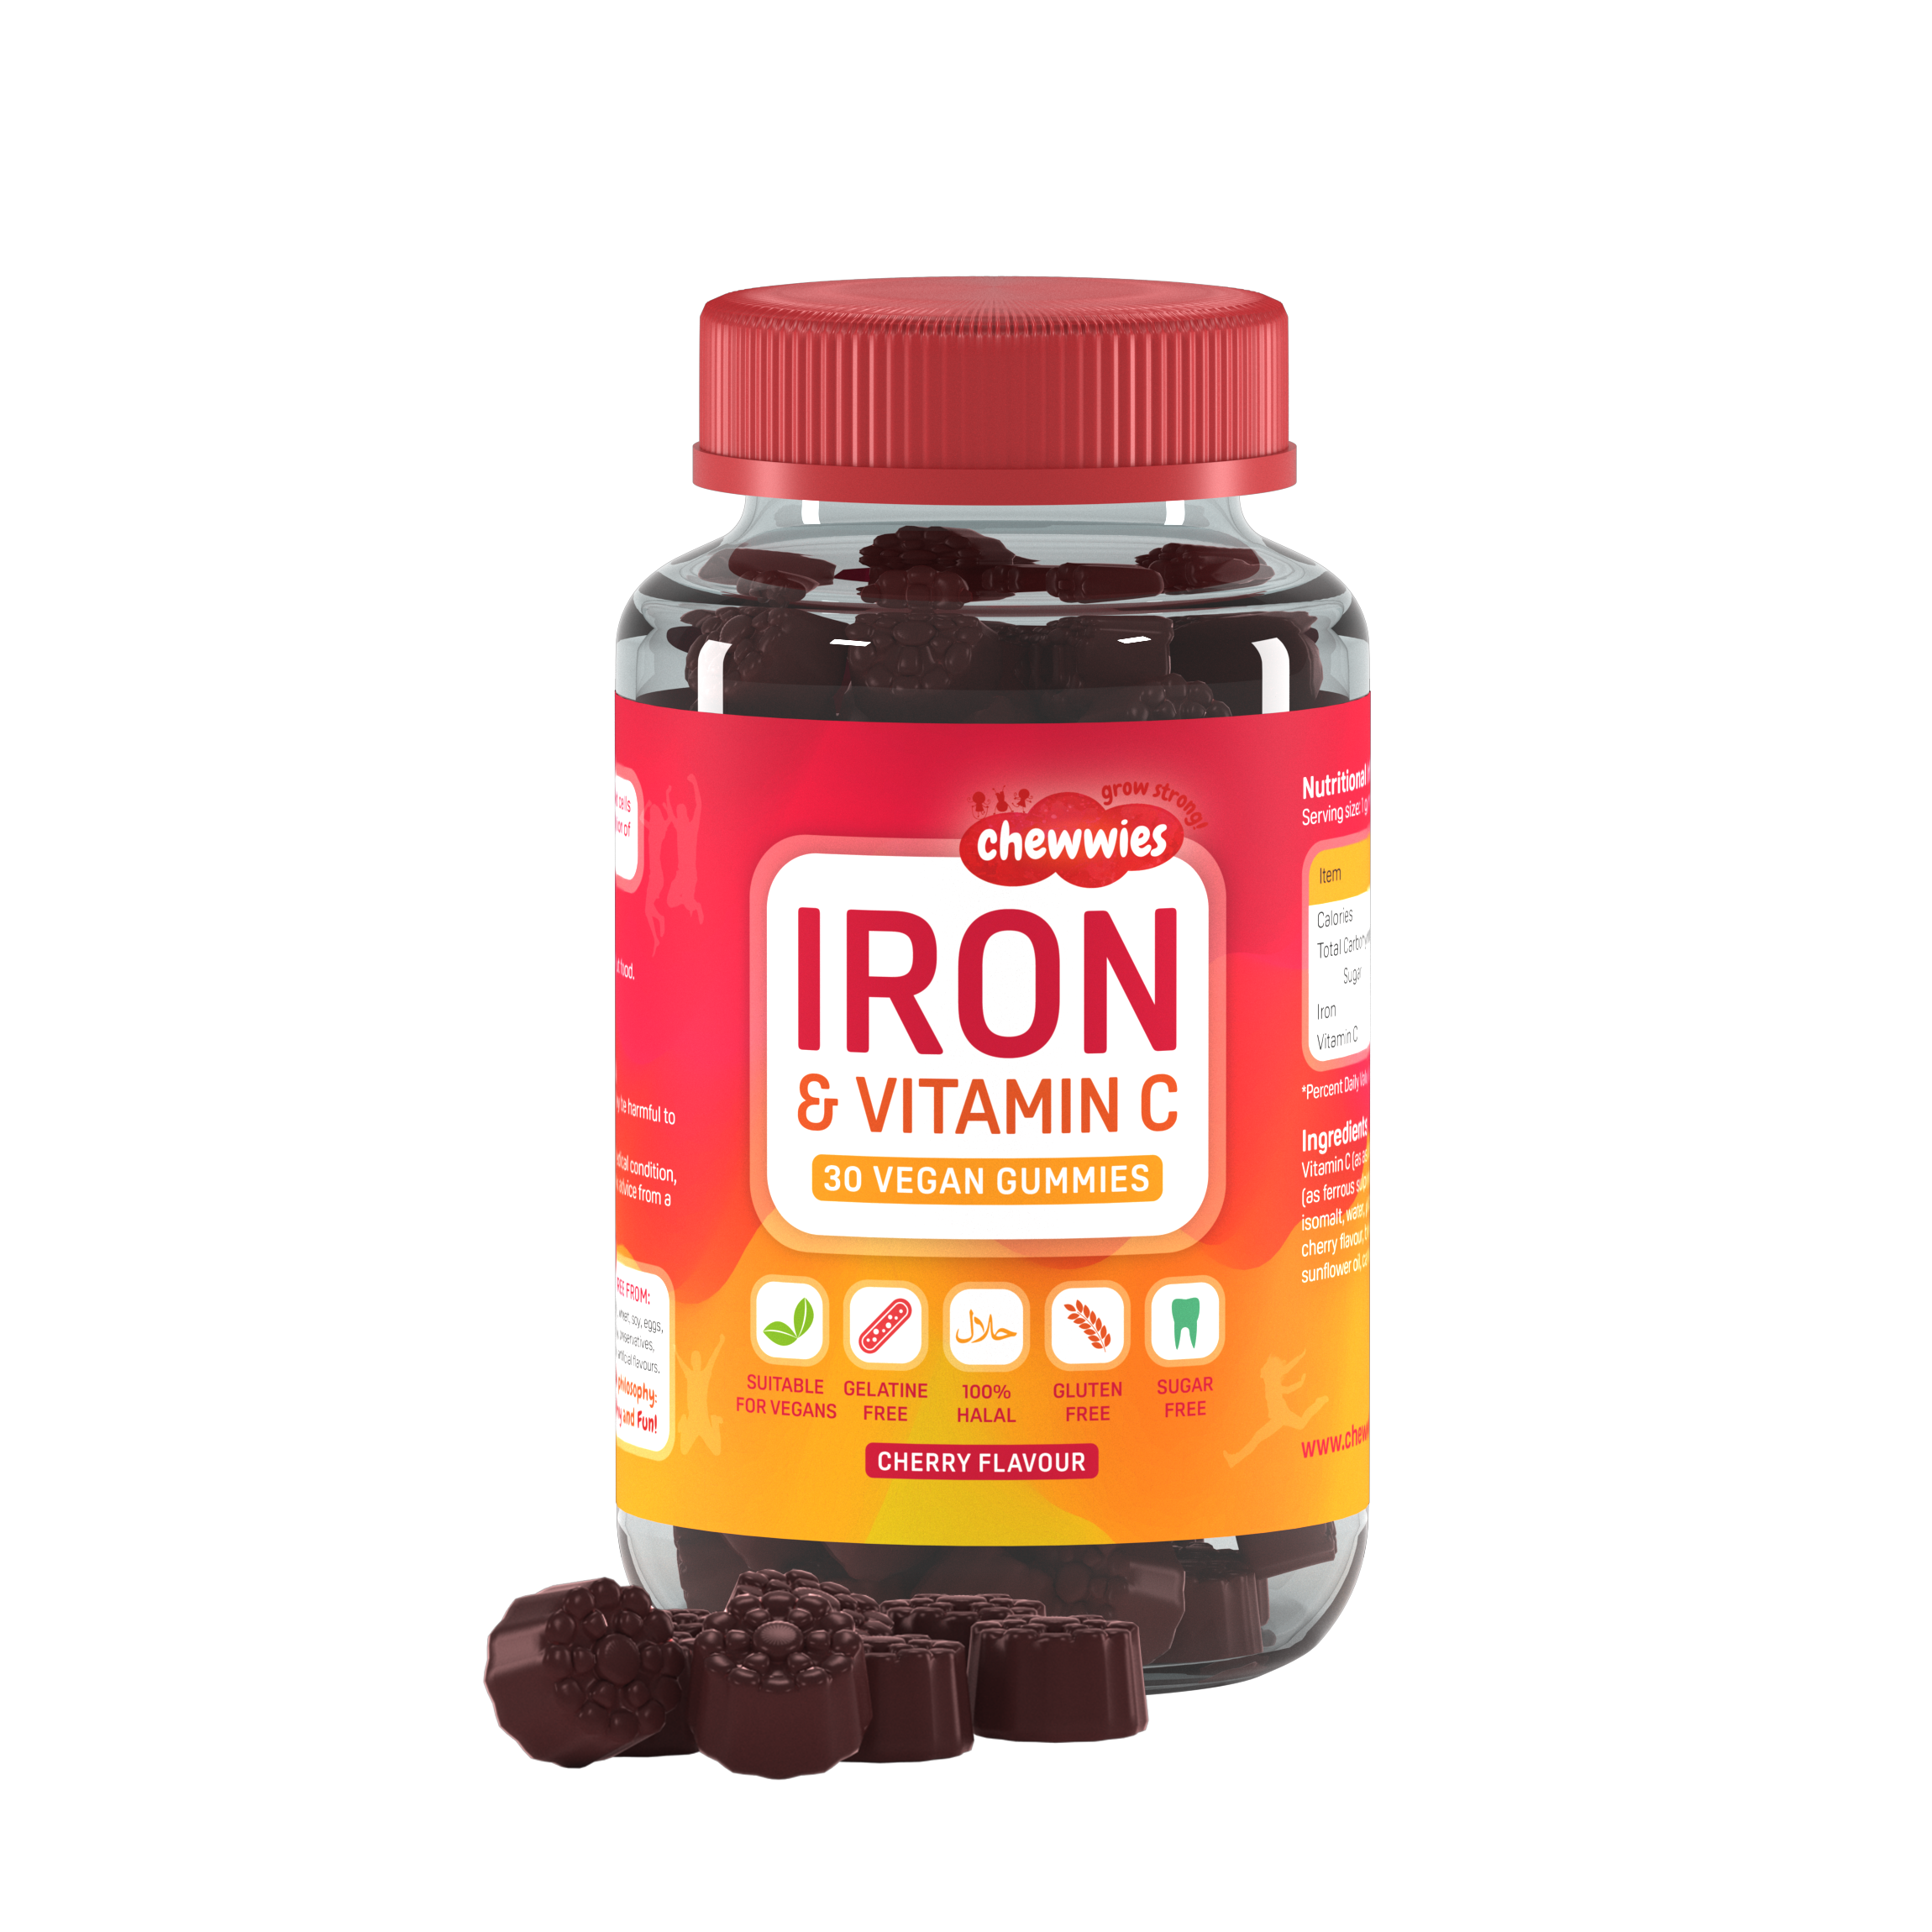 Chewwies Iron & Vitamin C, 30 cherry-flavored sugar-free vegan gummies for energy and reduction of tiredness and fatigue